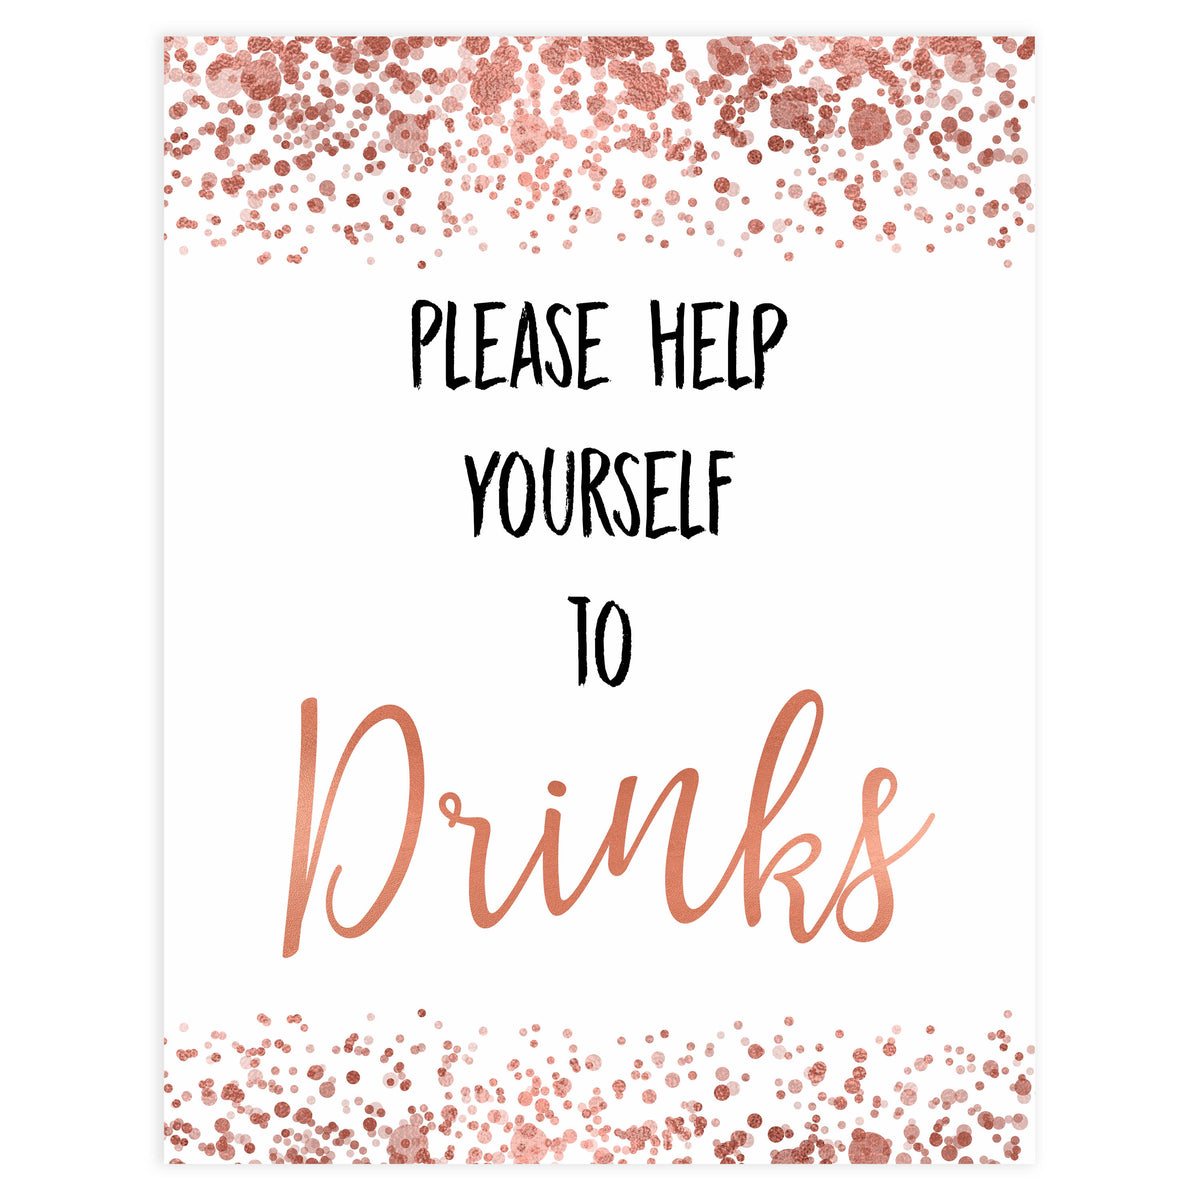 drinks baby signs, drink baby table signs, Rose gold baby decor, printable baby table signs, printable baby decor, rose gold table signs, fun baby signs, rose gold fun baby table signs